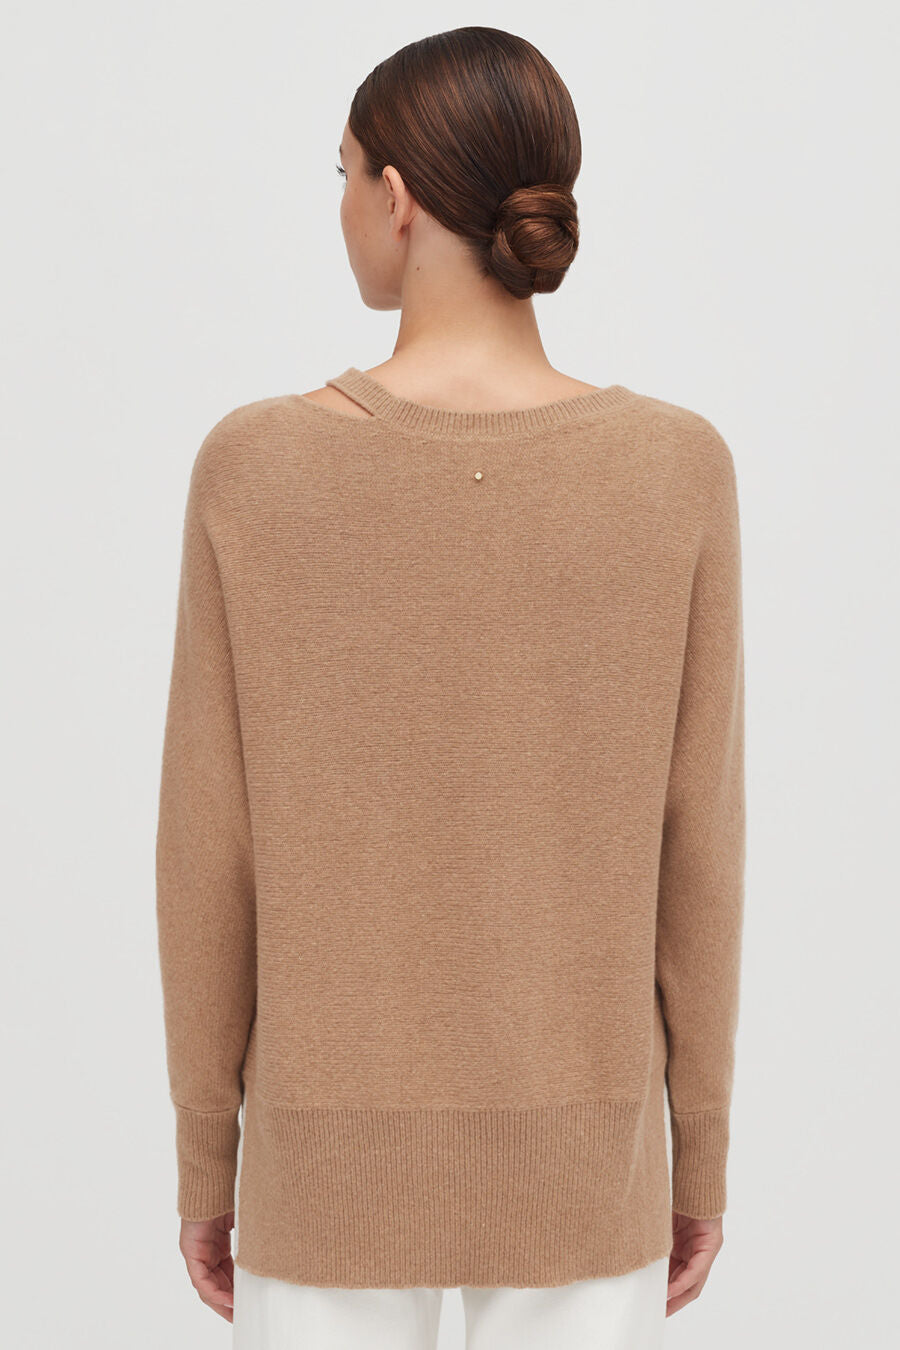 Woman seen from behind with a bun hairstyle wearing a sweater.